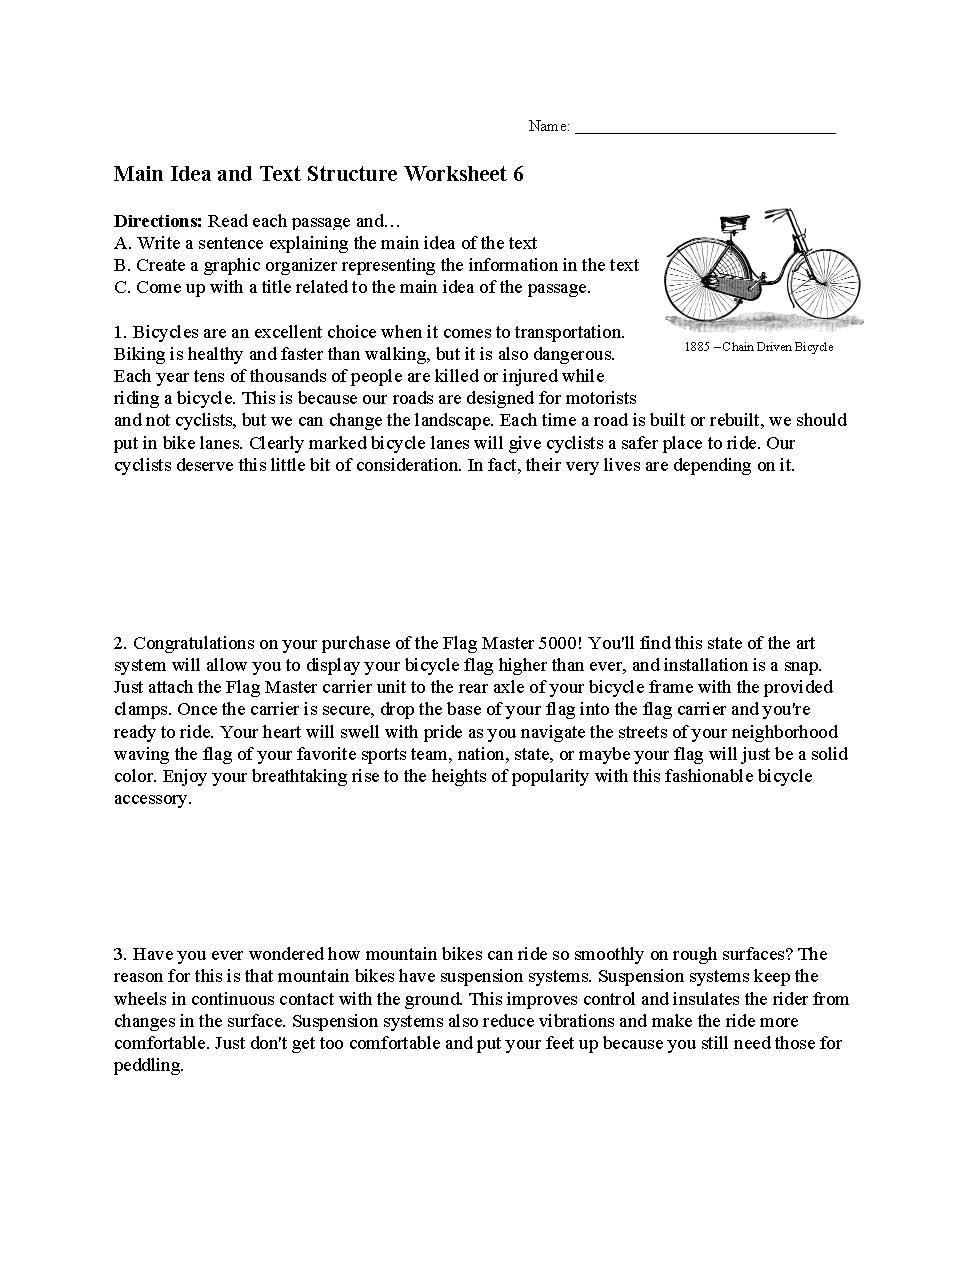 This is a preview image of Main Idea and Text Structure Worksheet 6. Click on it to enlarge it or view the source file.